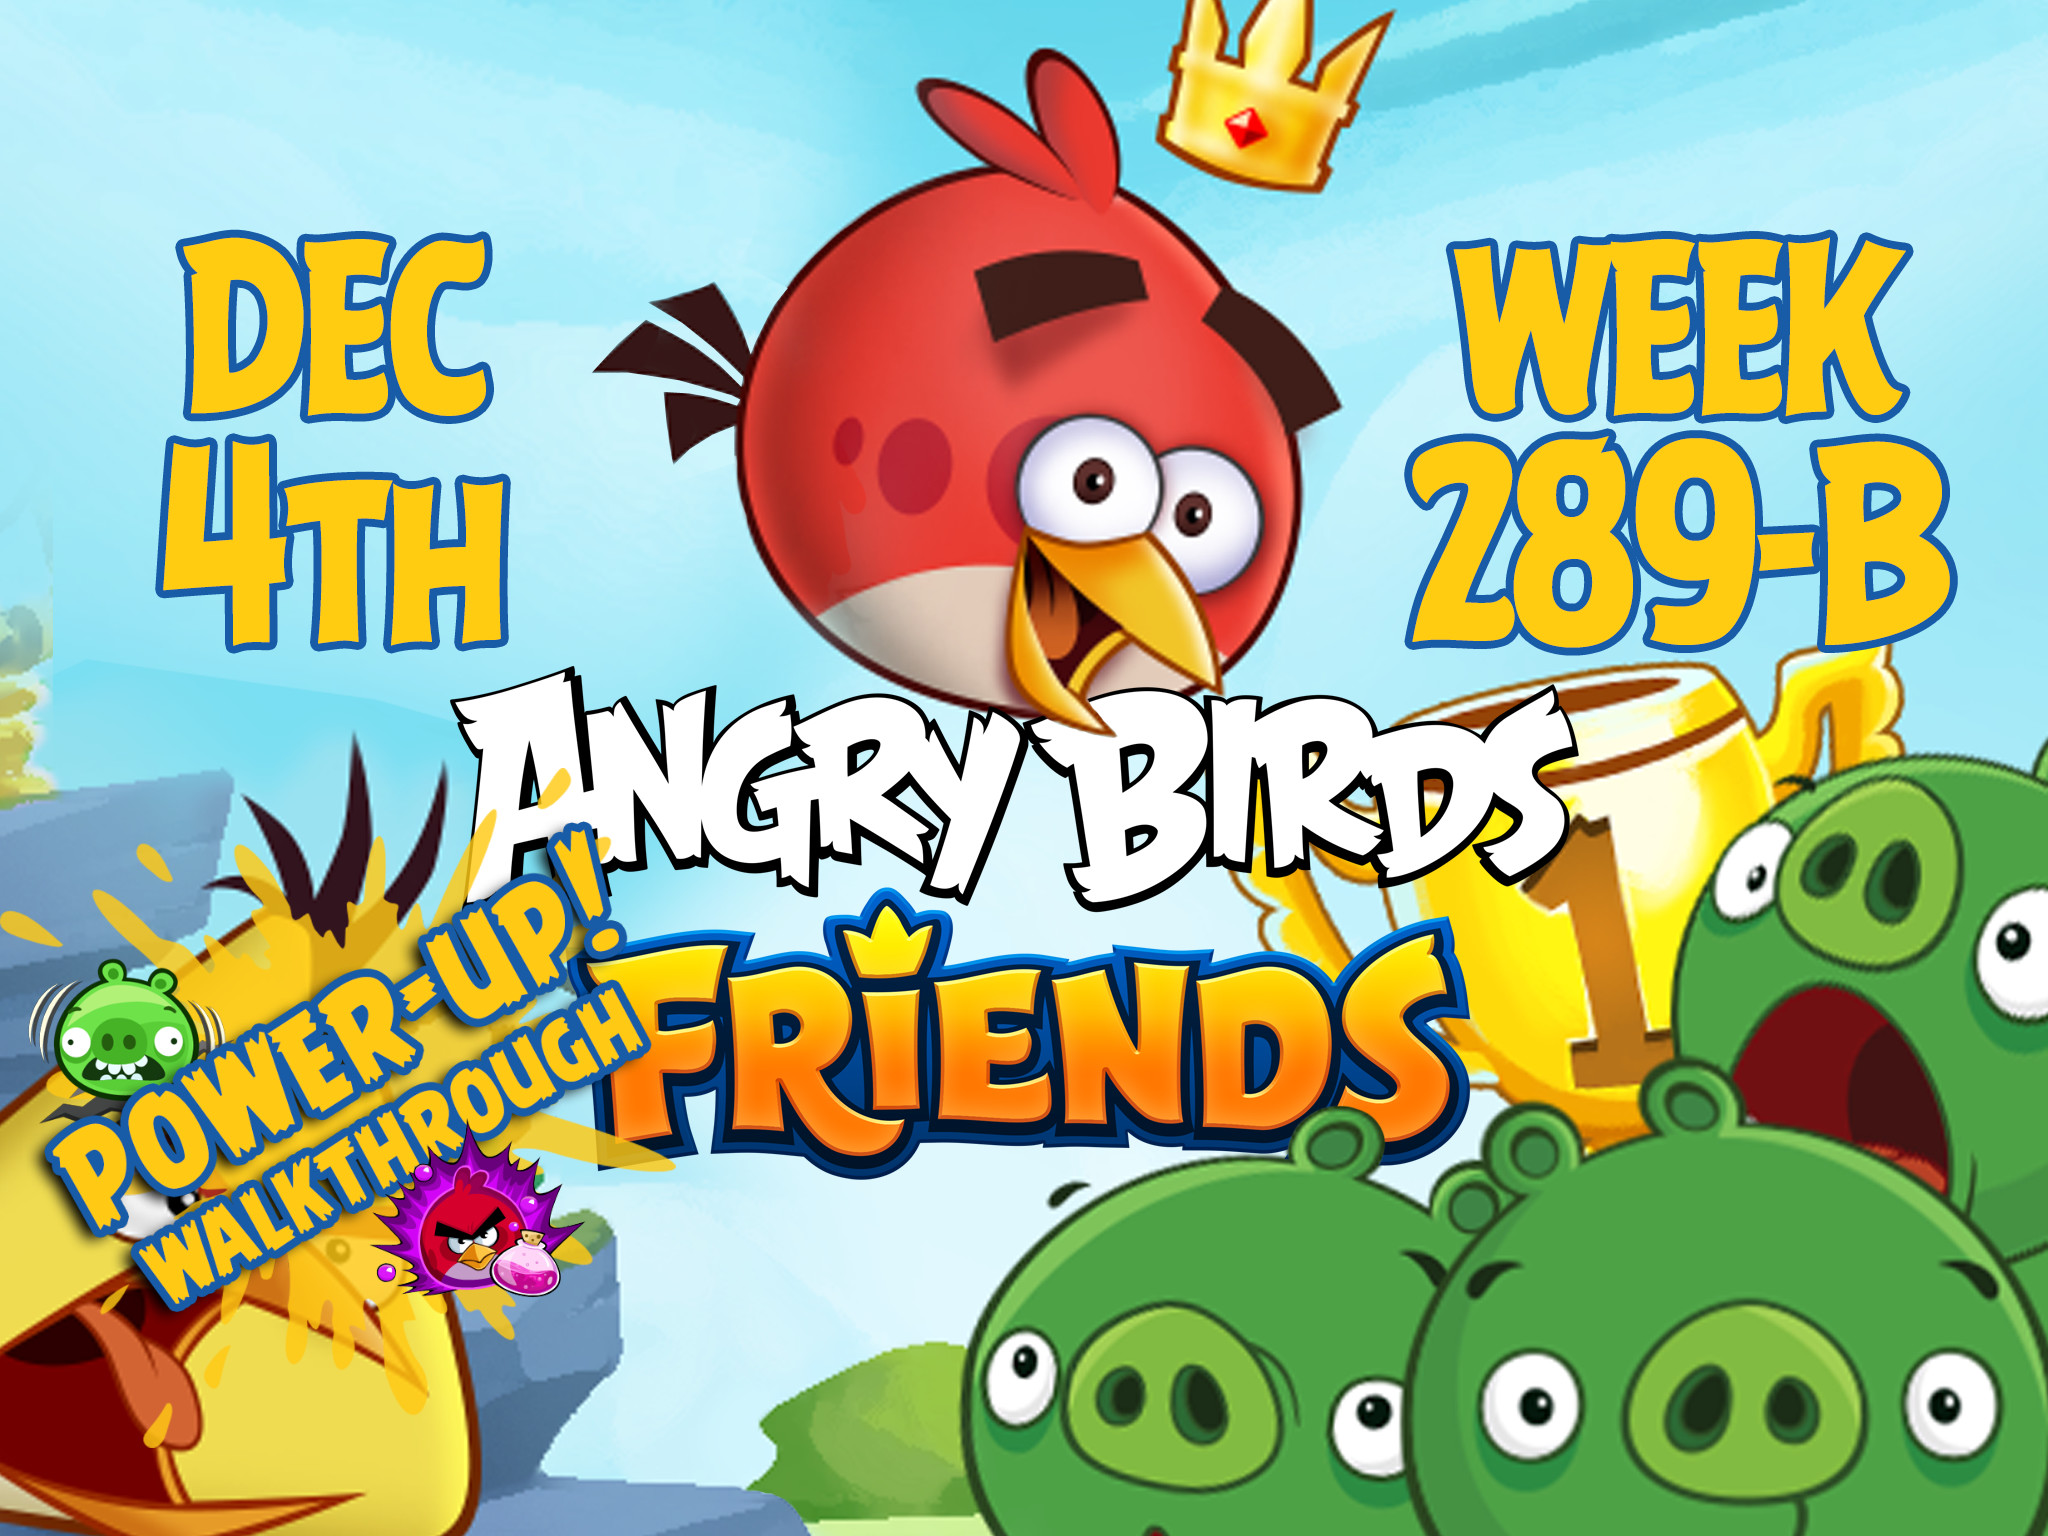 Angry Birds Friends Tournament Week 289-B Feature Image PU